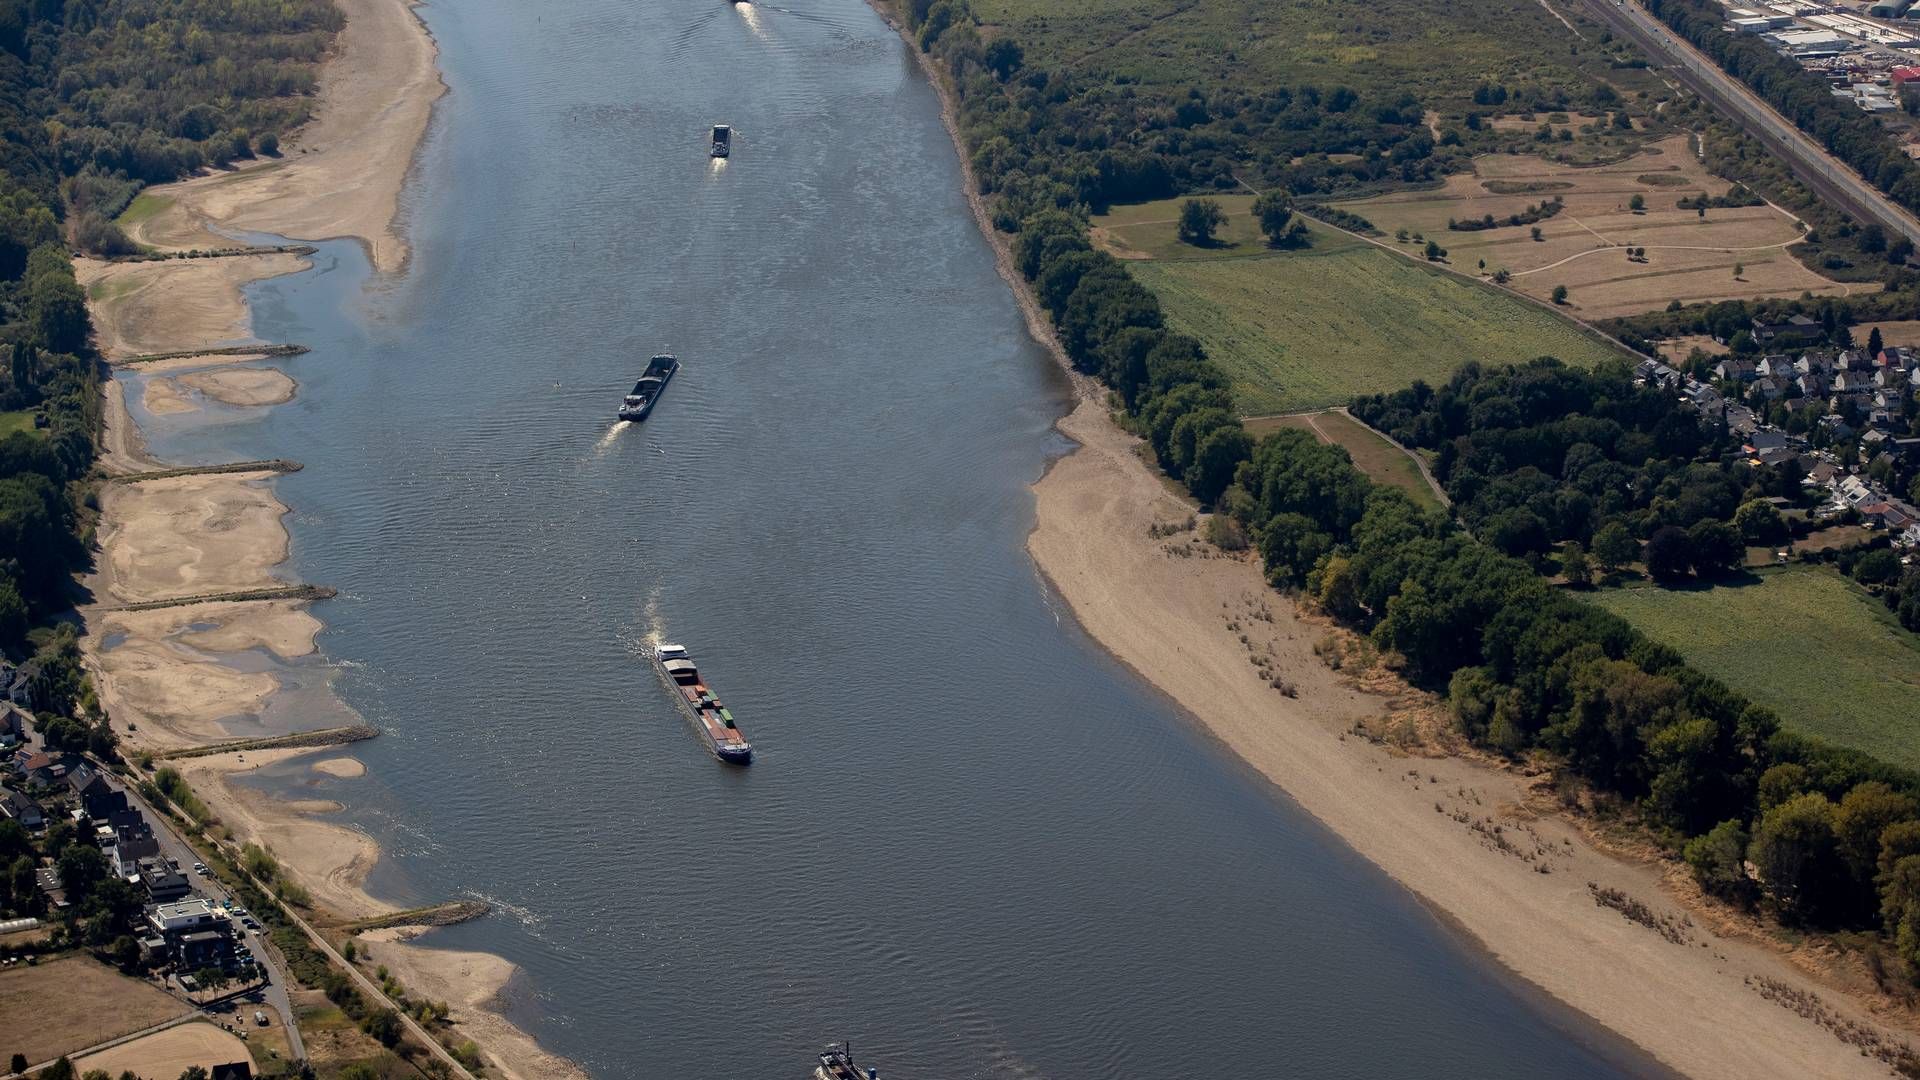 Last summer, low water levels made it difficult to navigate the Rhine river. A similar situation could be seen this year. | Photo: Christoph Reichwein/AP/Ritzau Scanpix